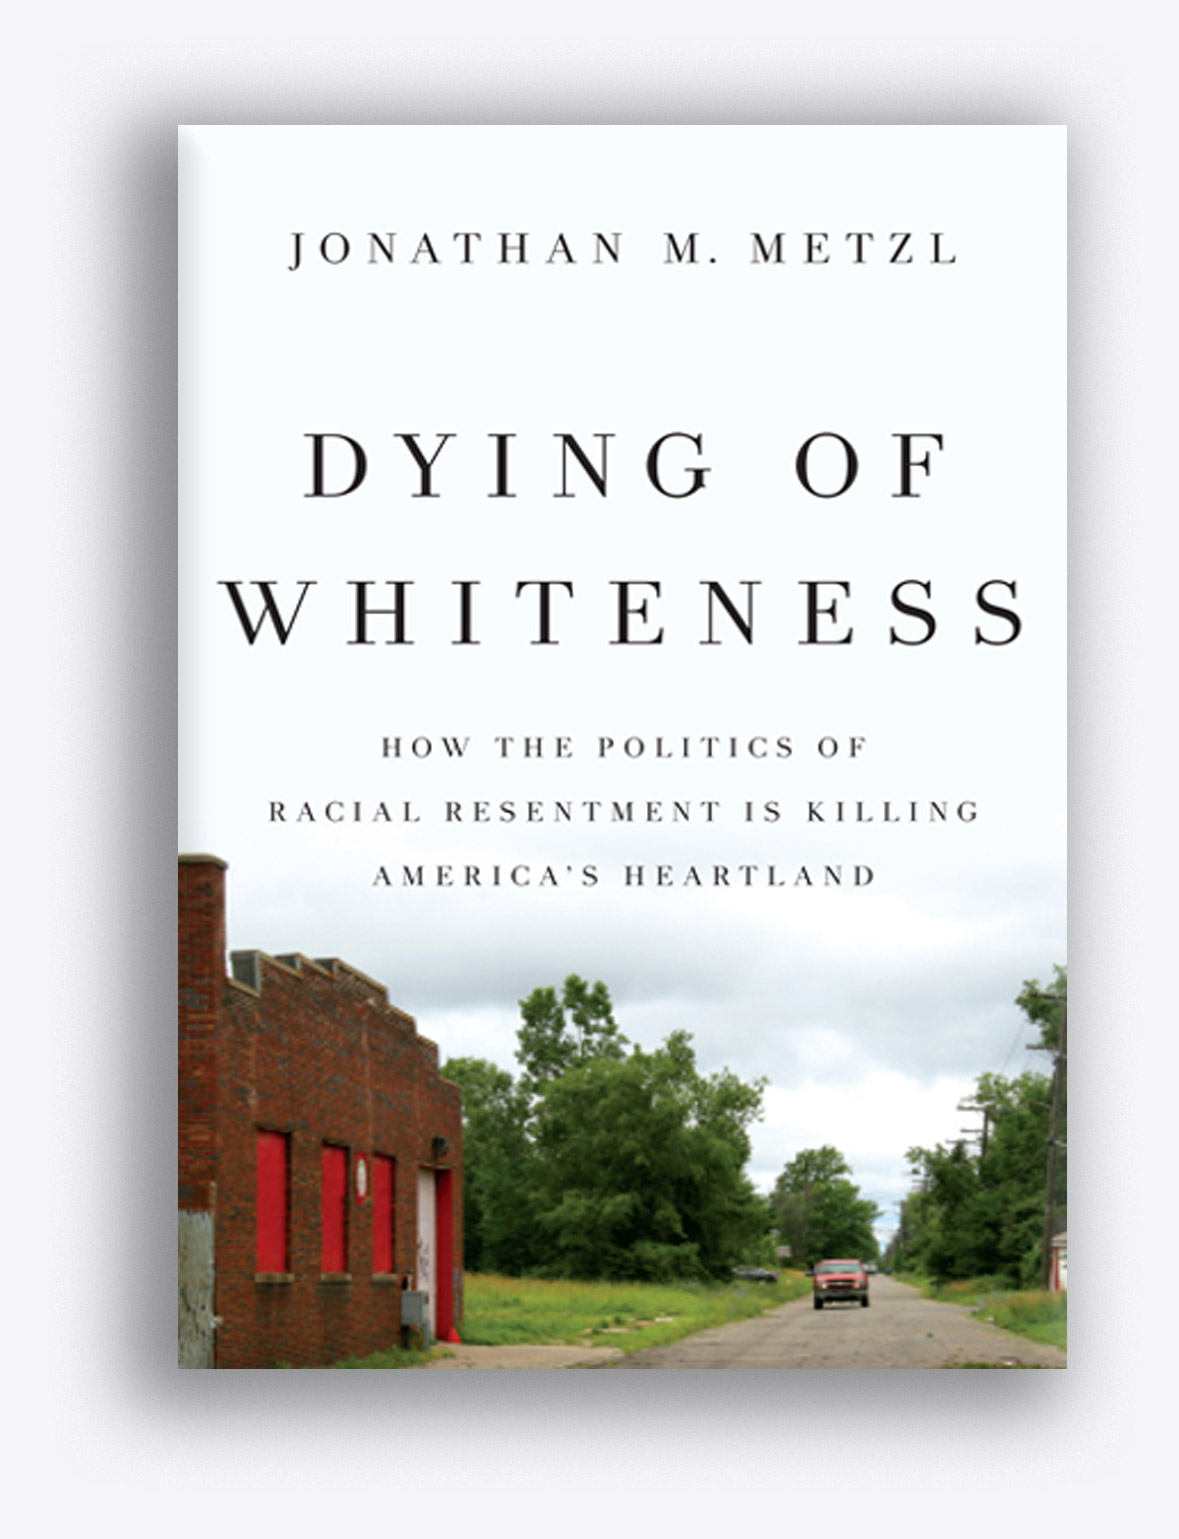 Dying of Whiteness: How the Politics of Racial Resentment Is Killing America’s Heartland by Jonathan Metzl book cover